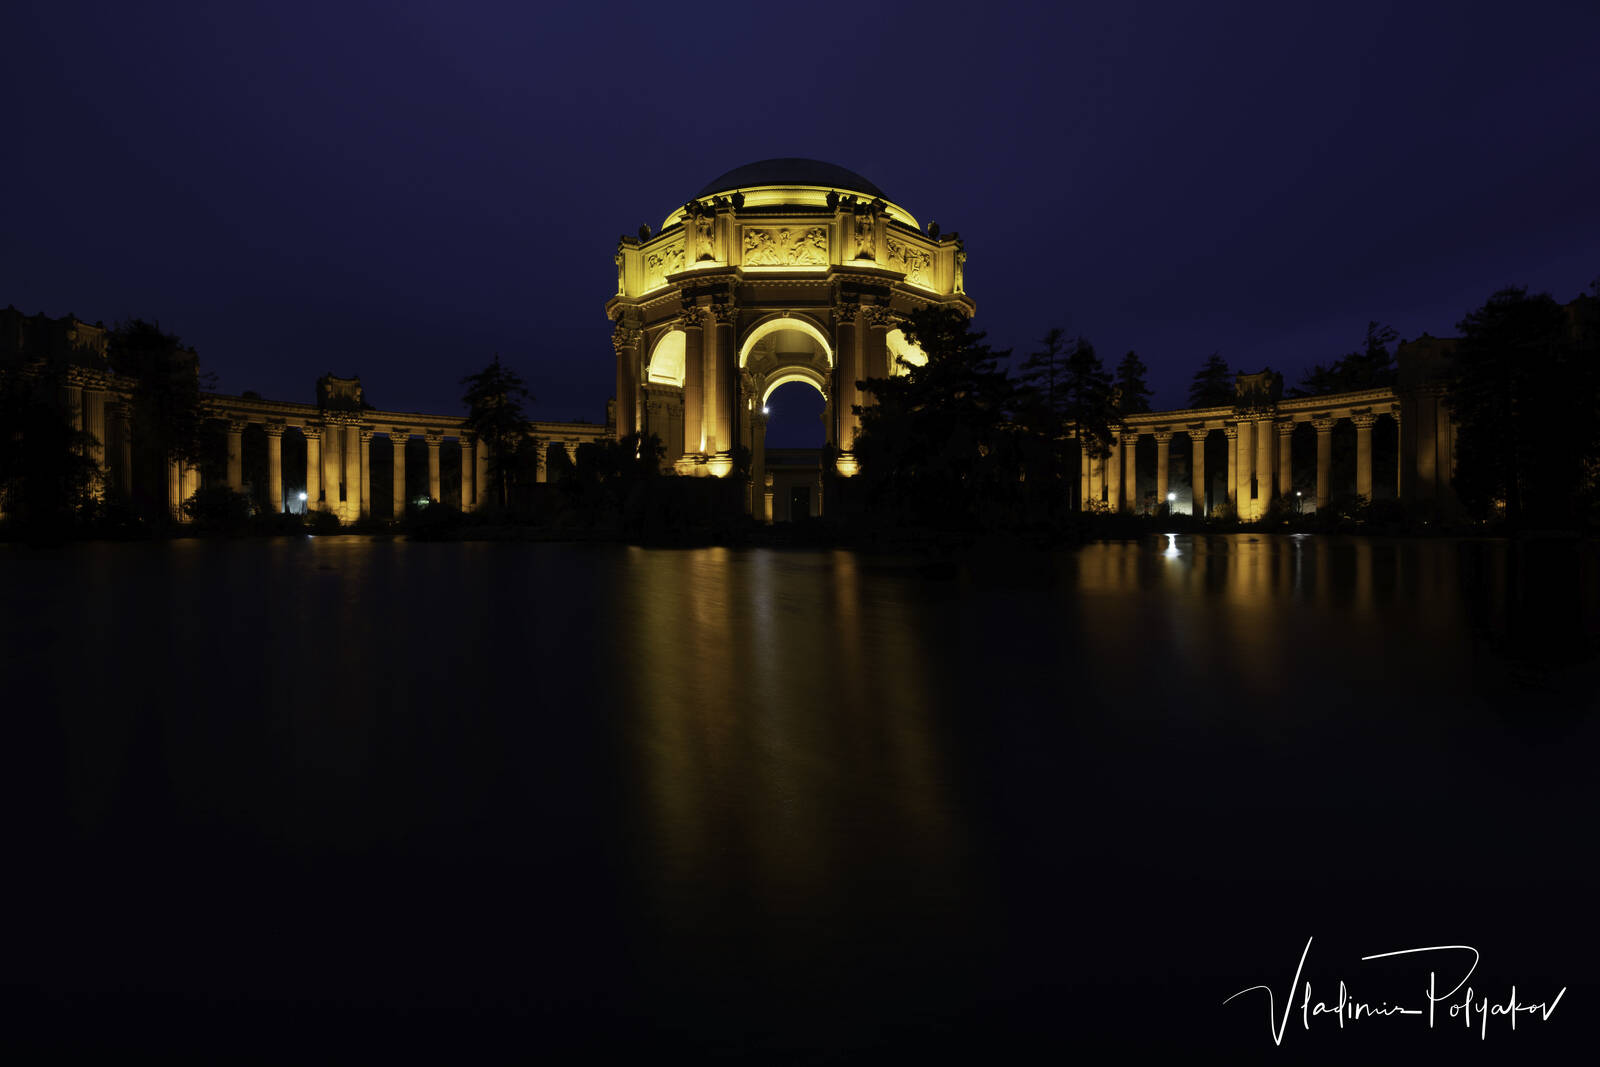 Image of The Palace of Fine Arts by Vladimir Polyakov